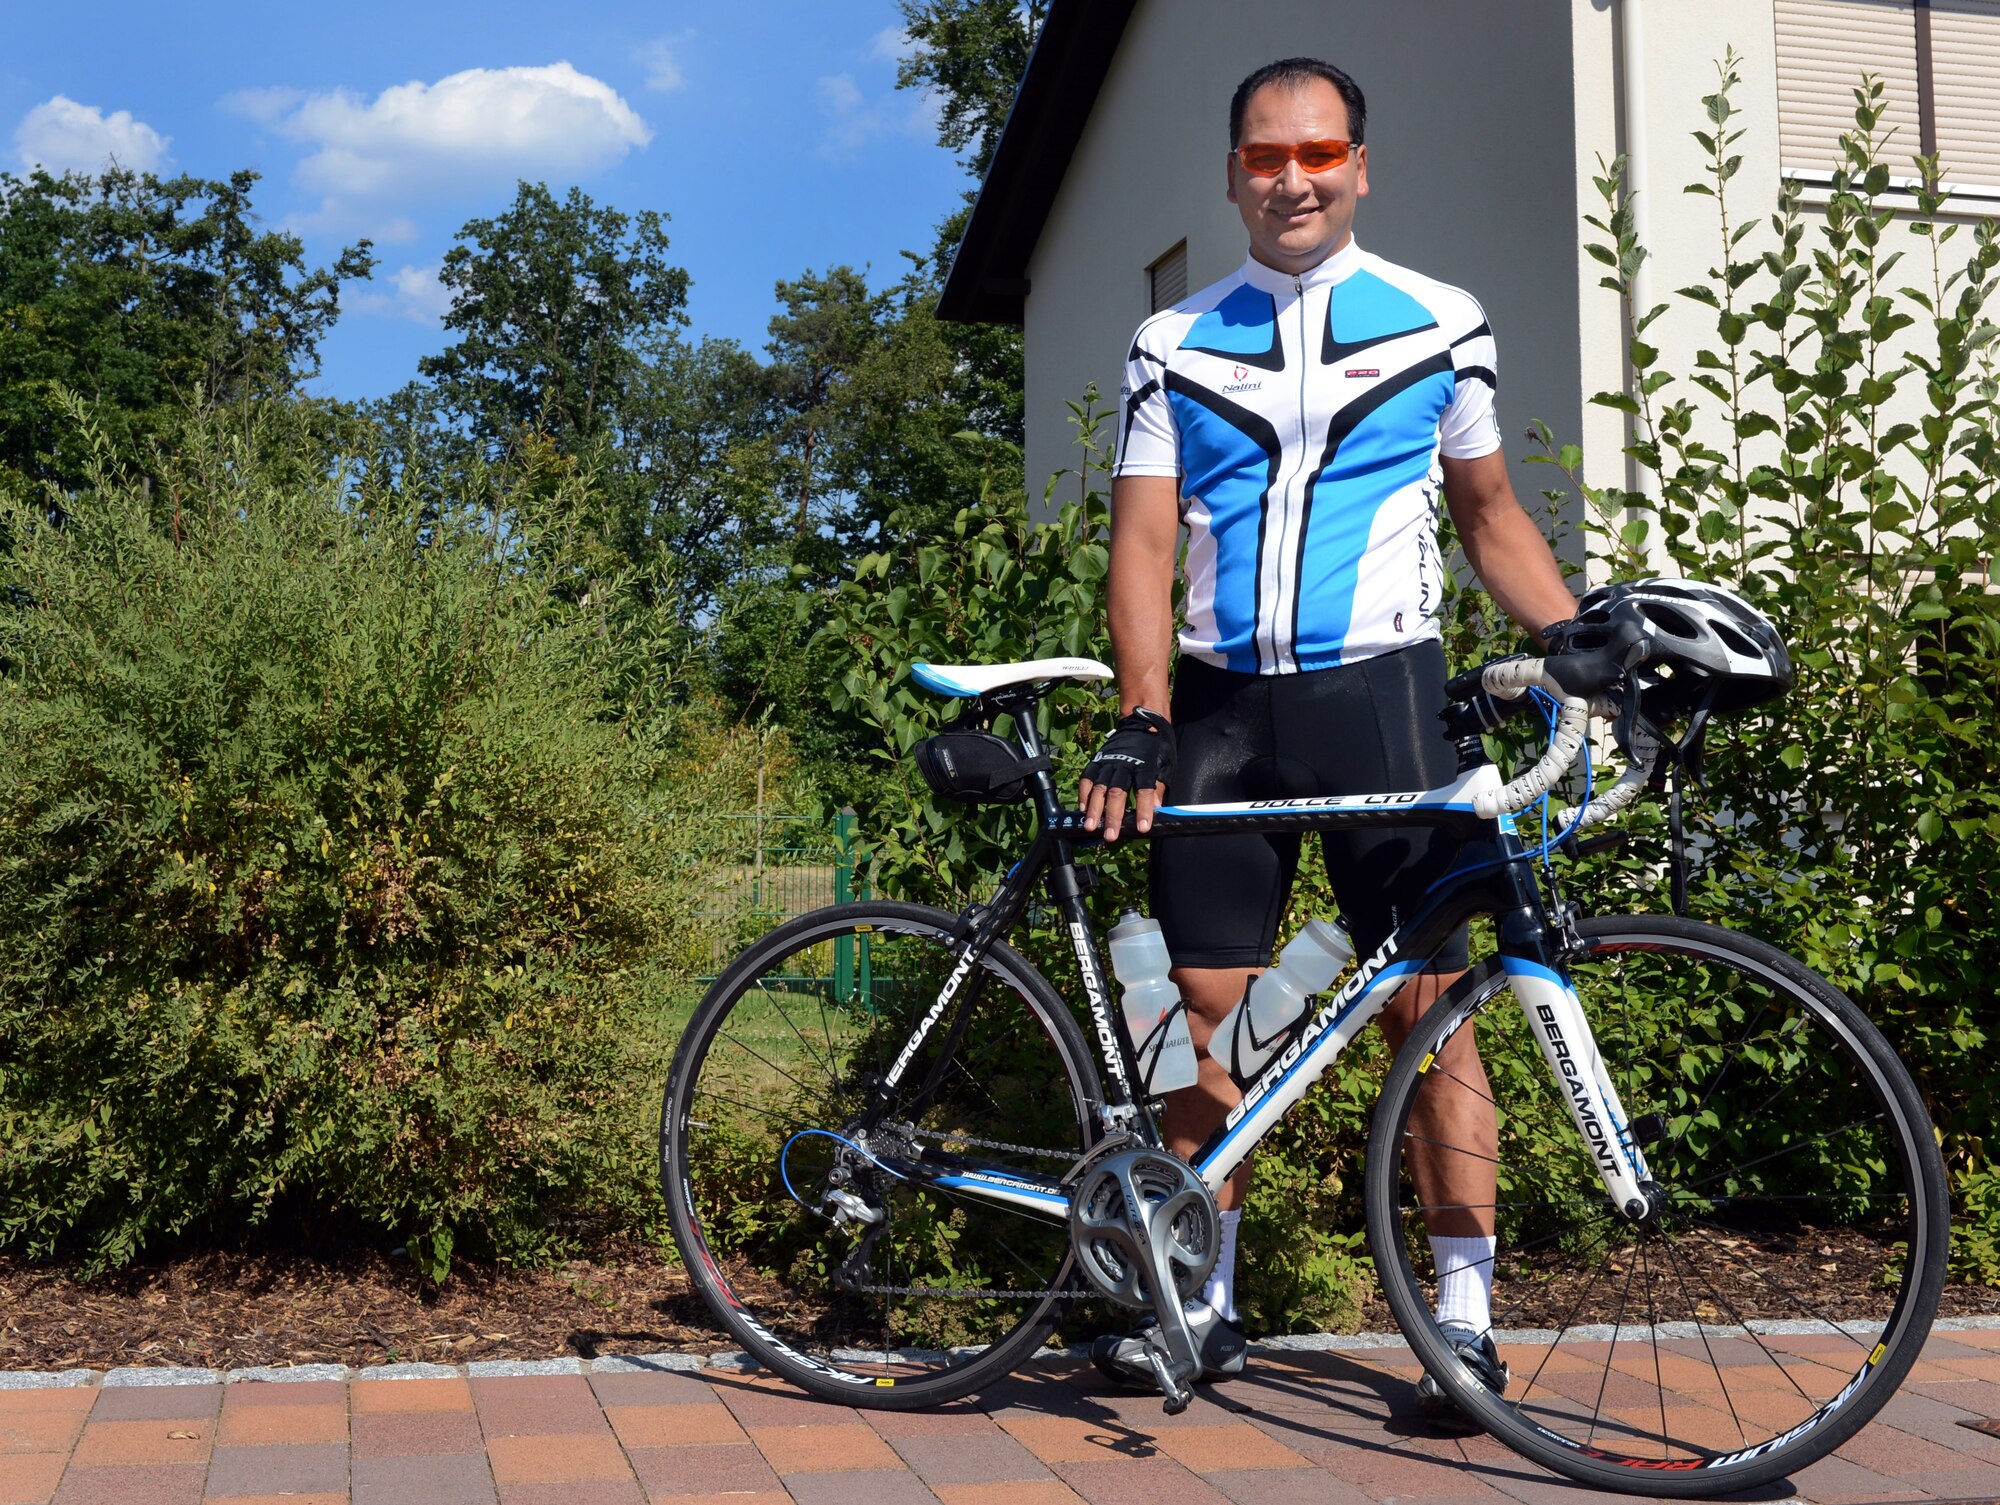 Lt. Col. Jason Dudjak, U.S. Air Forces in Europe and Air Forces Africa Expeditionary Operations Branch chief, poses next to his bike July 23. Dudjak will make a 425-mile trip, biking from Ramstein to the Brandenburg Gate in Berlin. Dudjak has trained four months for this five-day trip. He will bike 60 to 100 miles each day and will be hosted in guest houses along the way for rest and recuperation. Although Dudjak has traveled through Germany over the course of his tour, his hope is to experience the country at a slower pace and get the chance to interact with the locals. The road trip begins Aug. 4. Visit the Ramstein Air Base Web page to view photos and track his progression throughout his journey. (U.S. Air Force photo/Senior Airman Caitlin Guinazu)